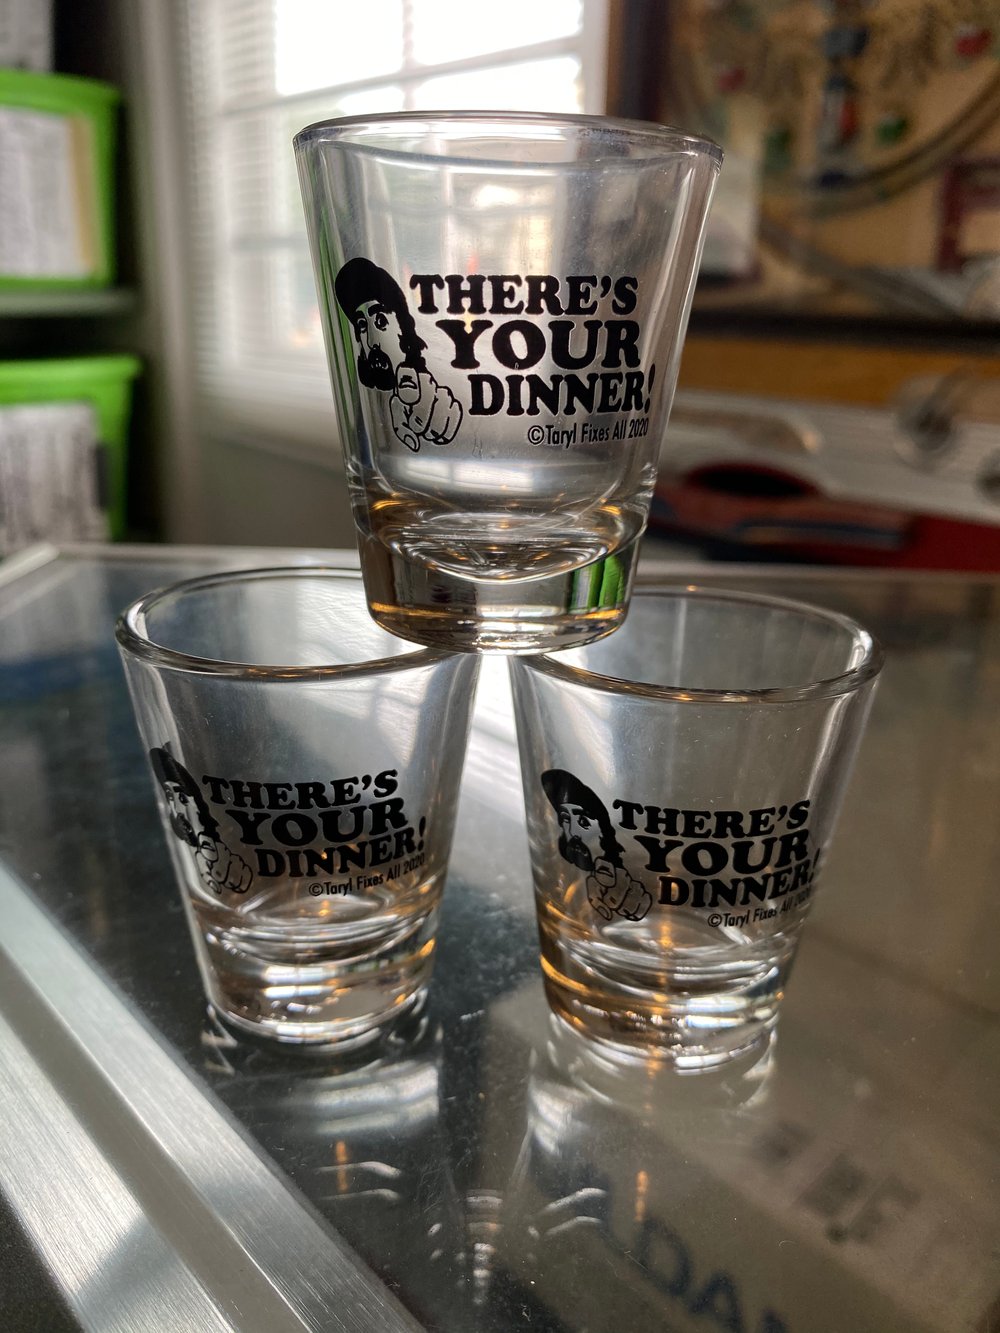 BACK IN STOCK!! Taryl “There’s Your Dinner” Shot Glass! 